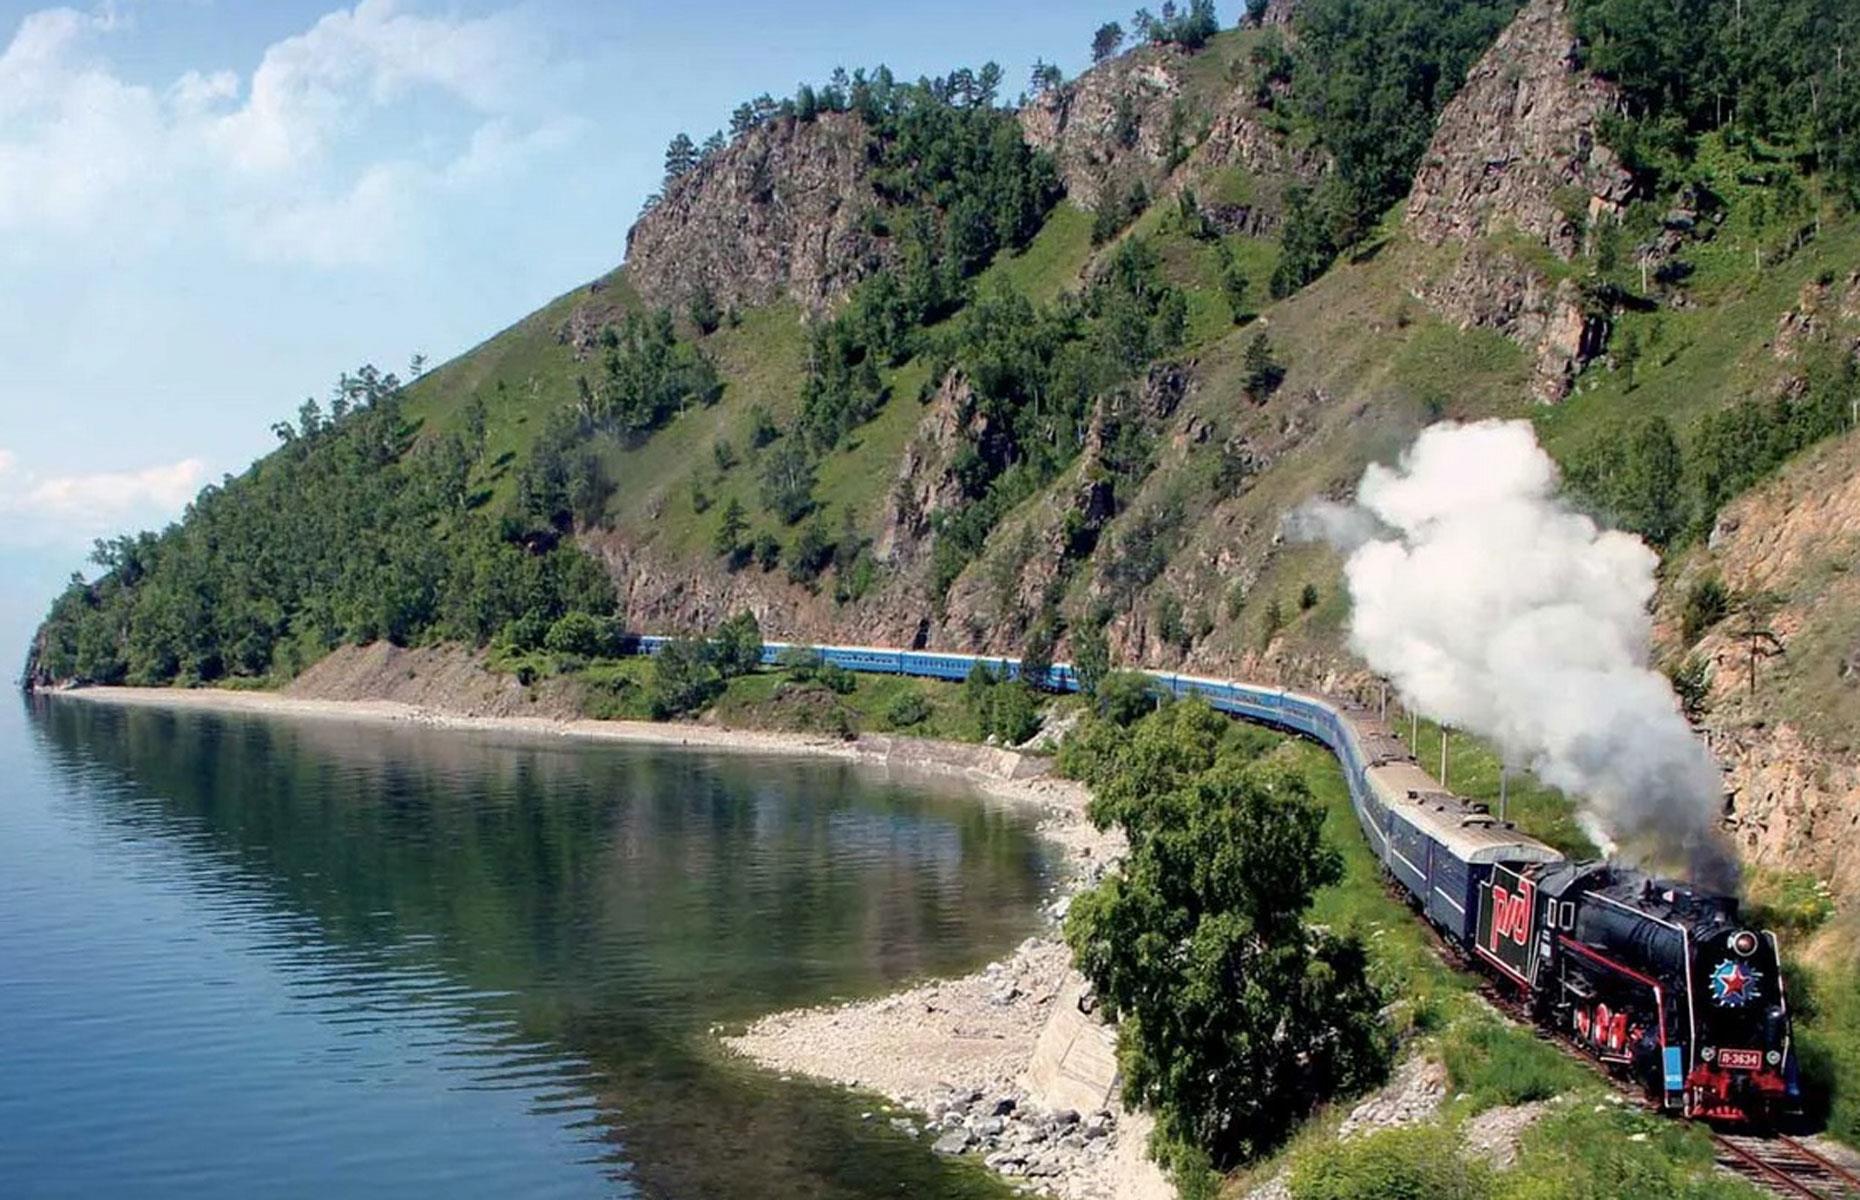 <p>Now that its Trans-Siberian route is a no-no, Golden Eagle's eponymous train operates in Central Asia, tracing the ancient Silk Road.</p>  <p>The Bar Lounge car is the heart of the train and the setting for an array of activities and entertainment. It even boasts a resident pianist. Two restaurant cars offer high-end international and local specialities, including caviar and sturgeon.</p>